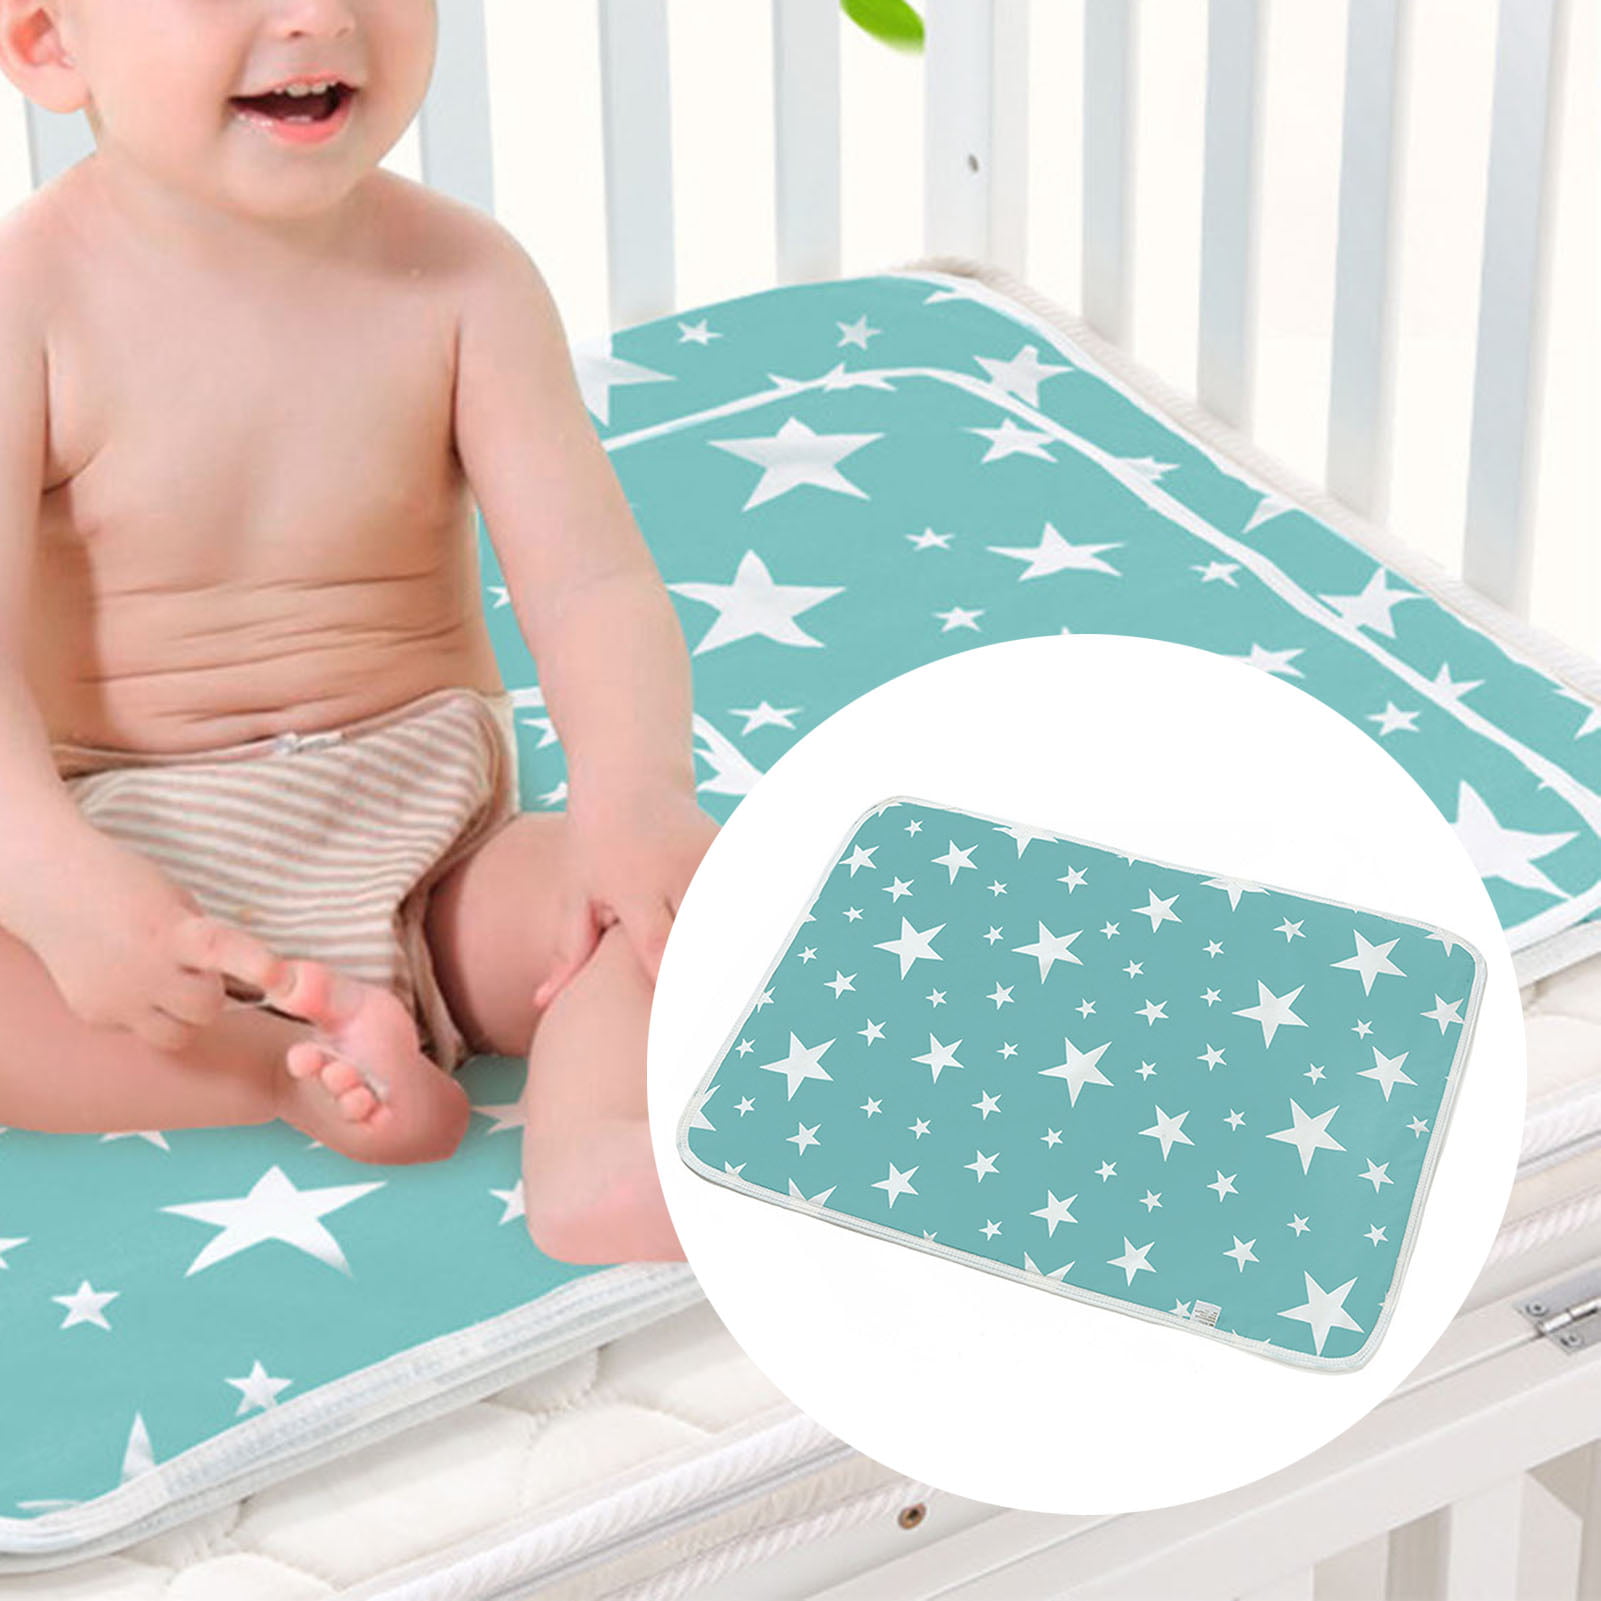 Baby Nappy Changing Mat Reusable Home Travel Wipe Clean Toddler Child Newborn FI 